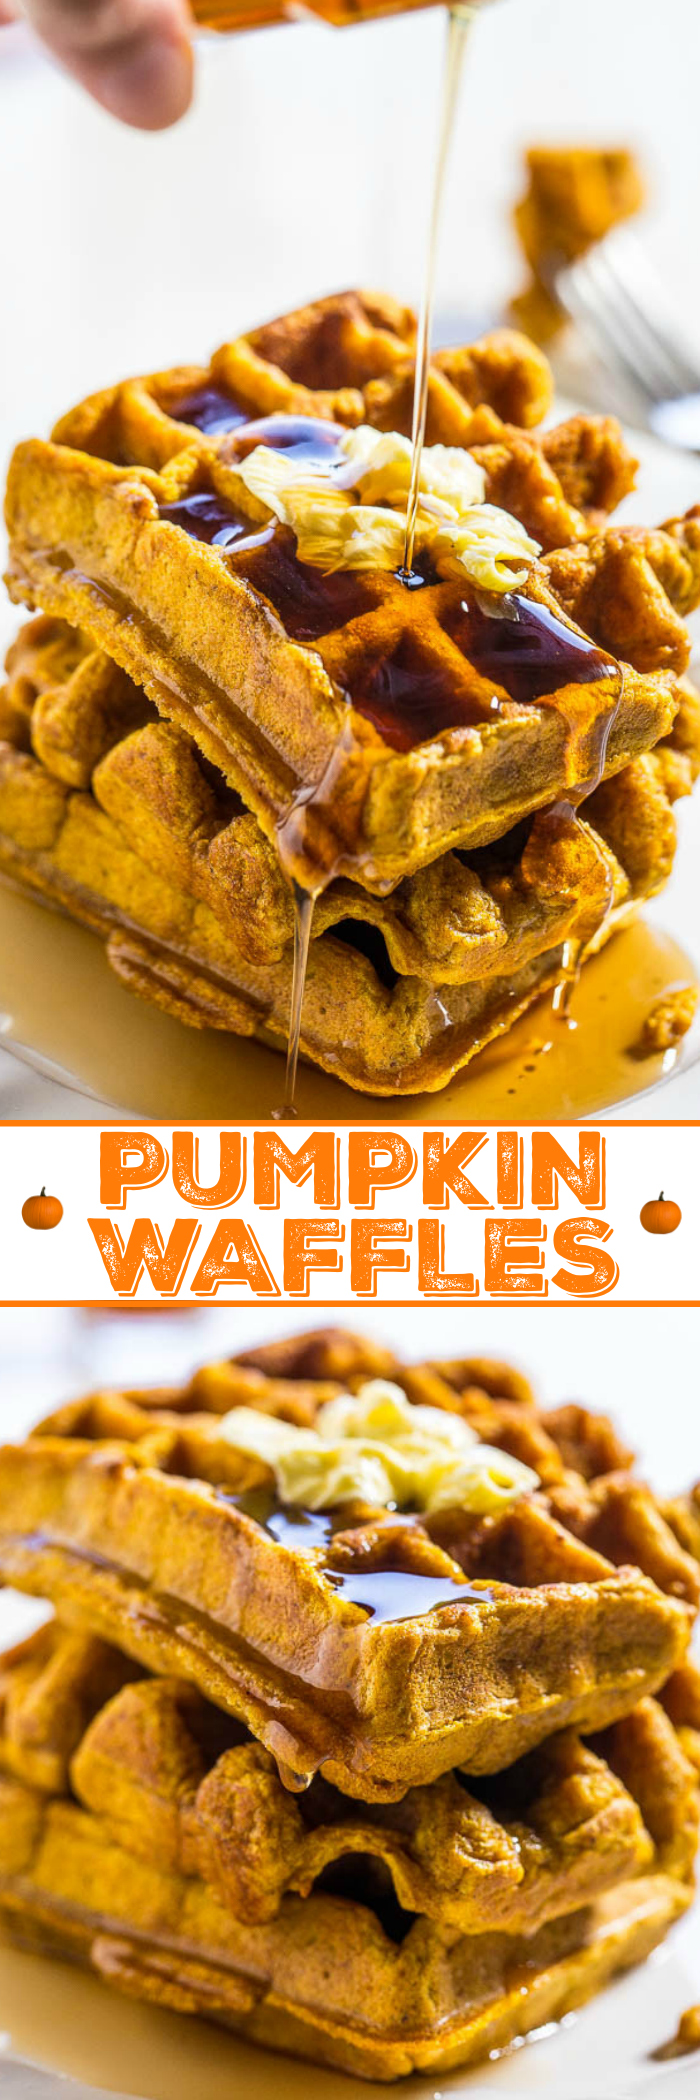 Pumpkin Waffles - Bold pumpkin flavor in every bite of these easy waffles!! Doused with maple syrup, they're a perfect comfort food breakfast that everyone will love!!